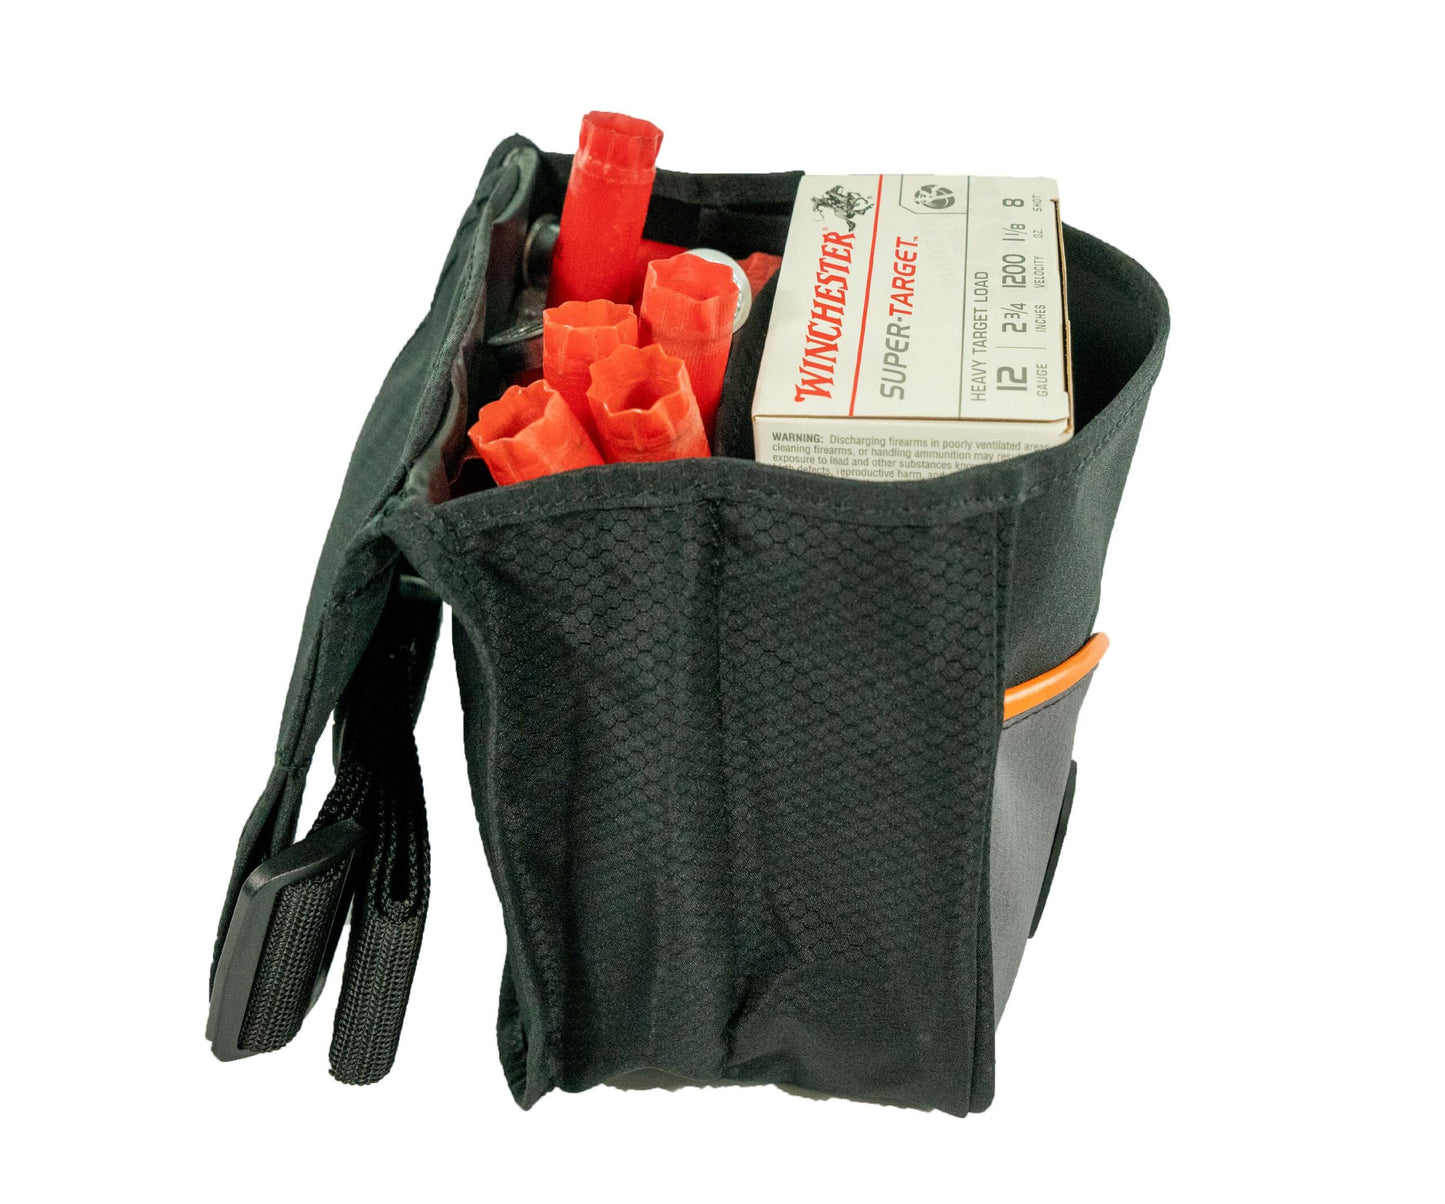 Bob Allen Club Series Divided Shell Pouch with Belt